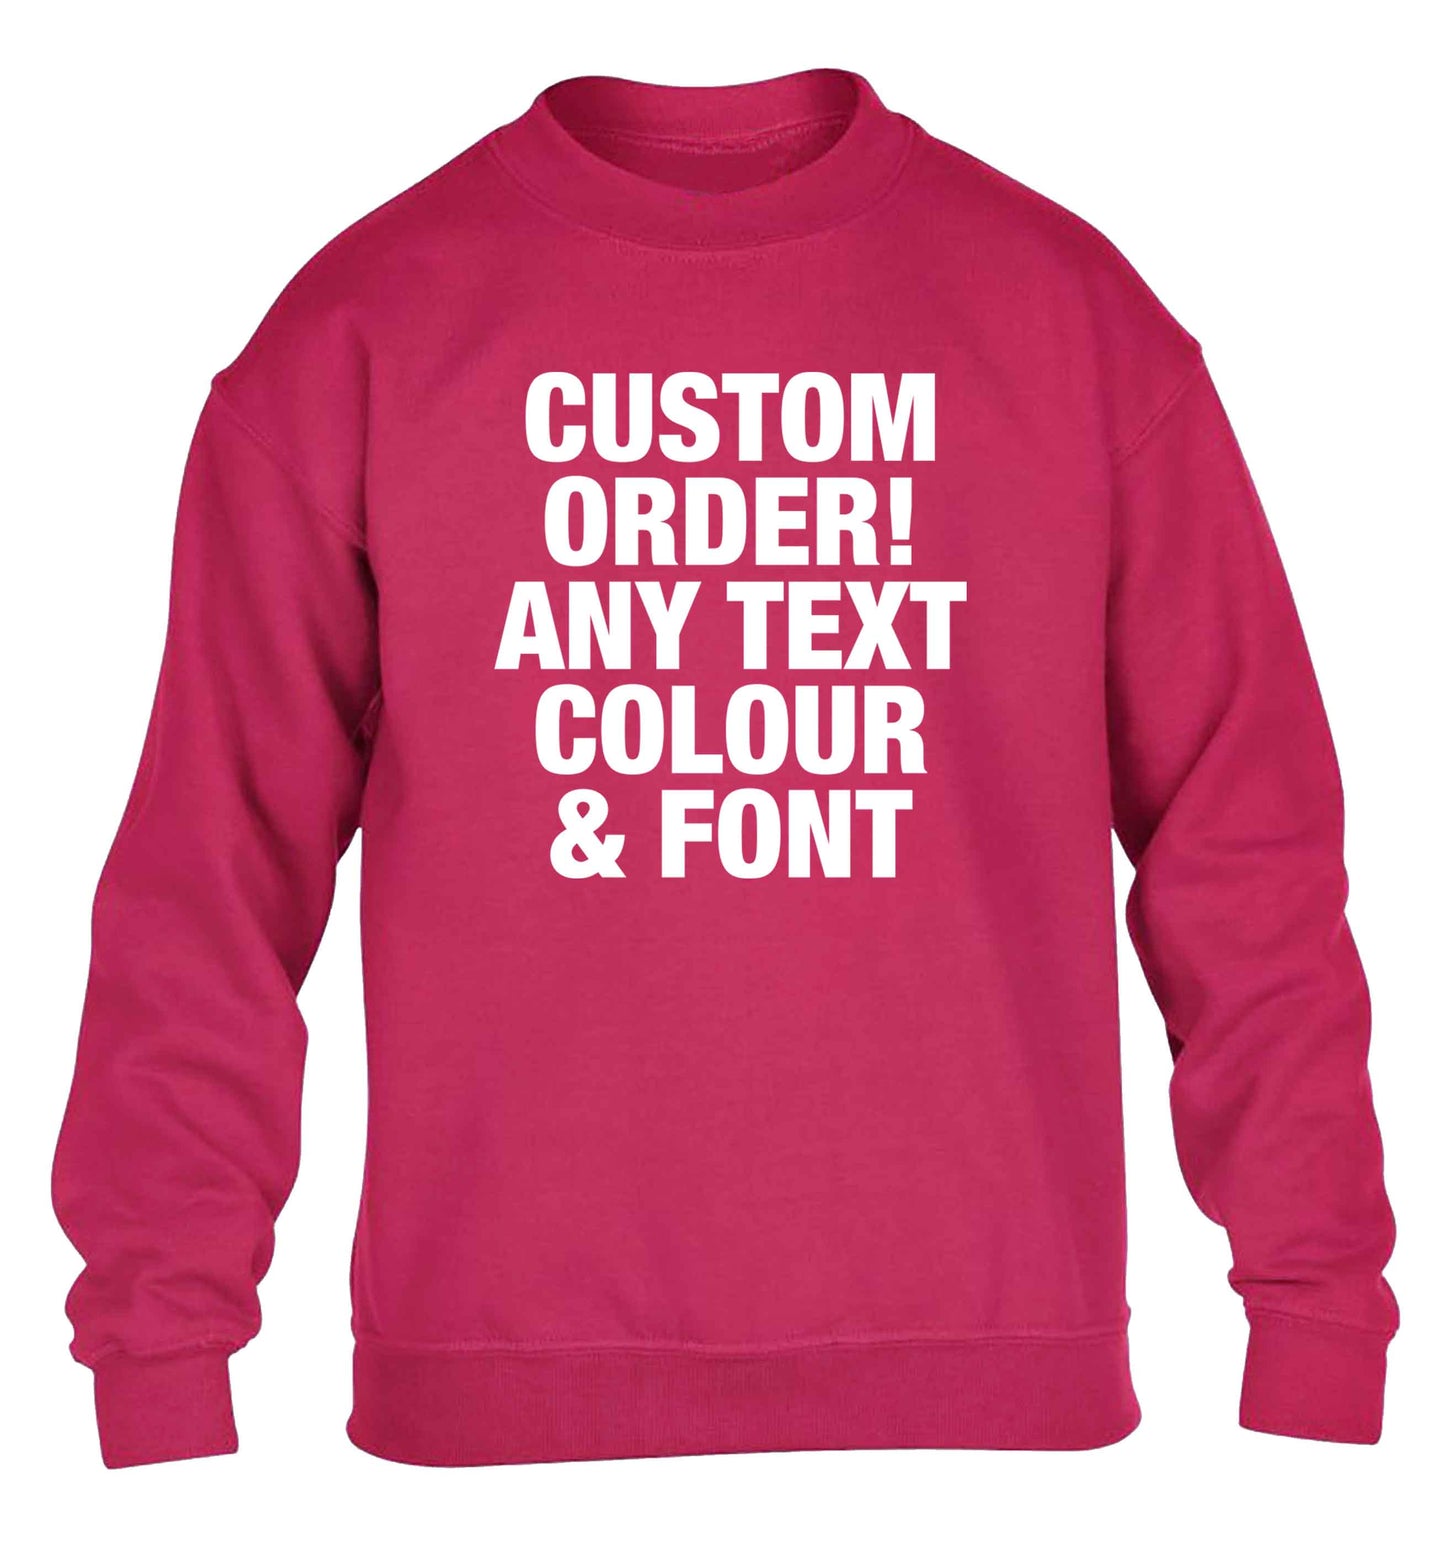 Custom order any text colour and font children's pink sweater 12-13 Years